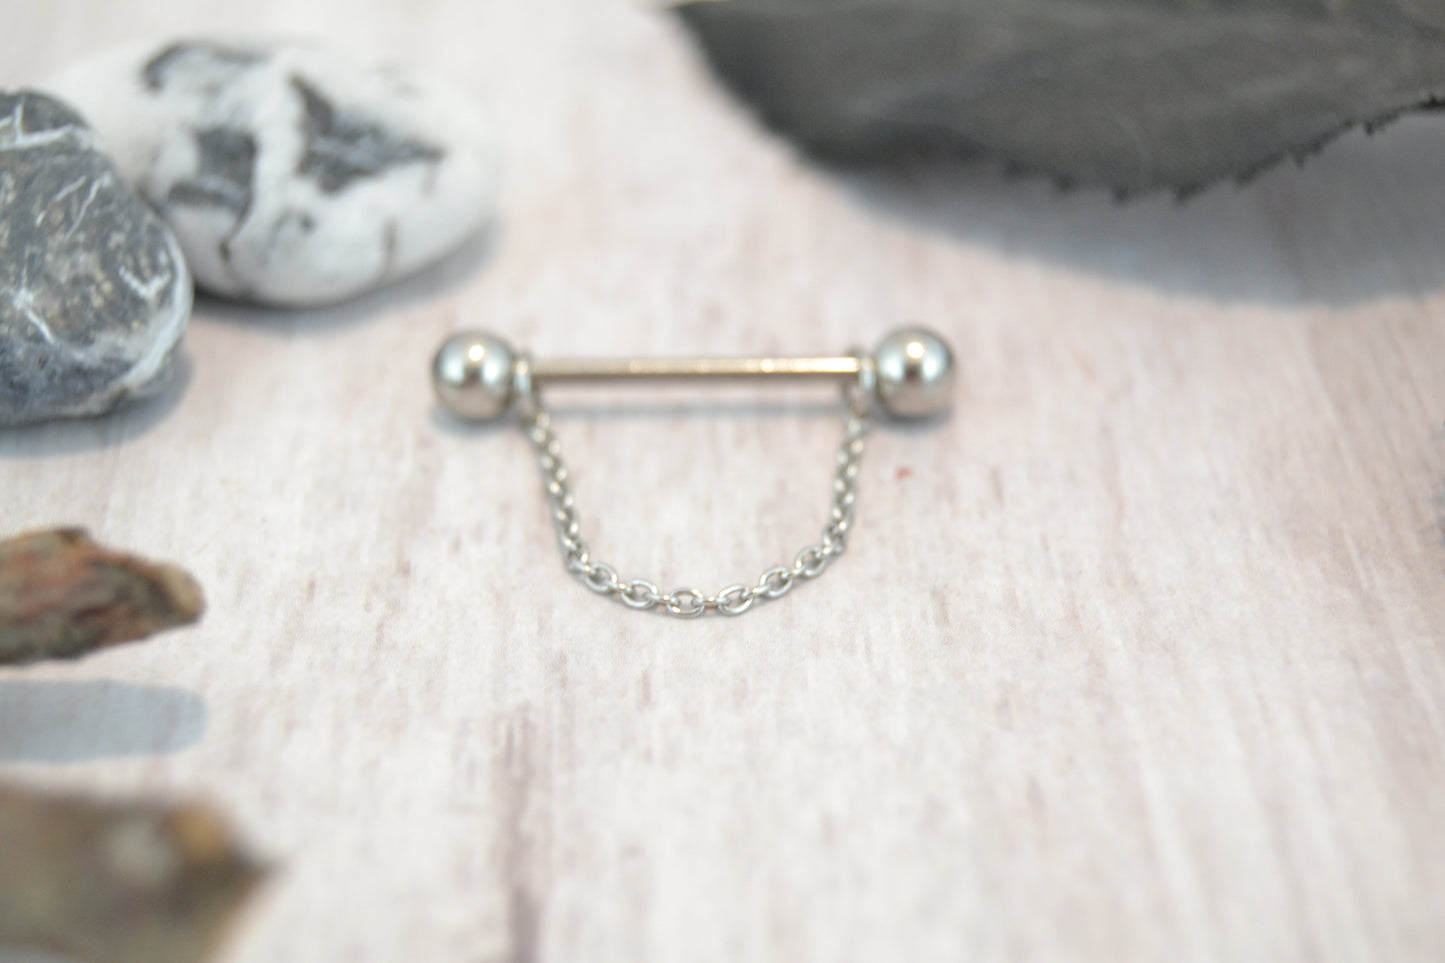 Chain 316L Stainless Steel Thin Cable Nipple Ring - 1 pc